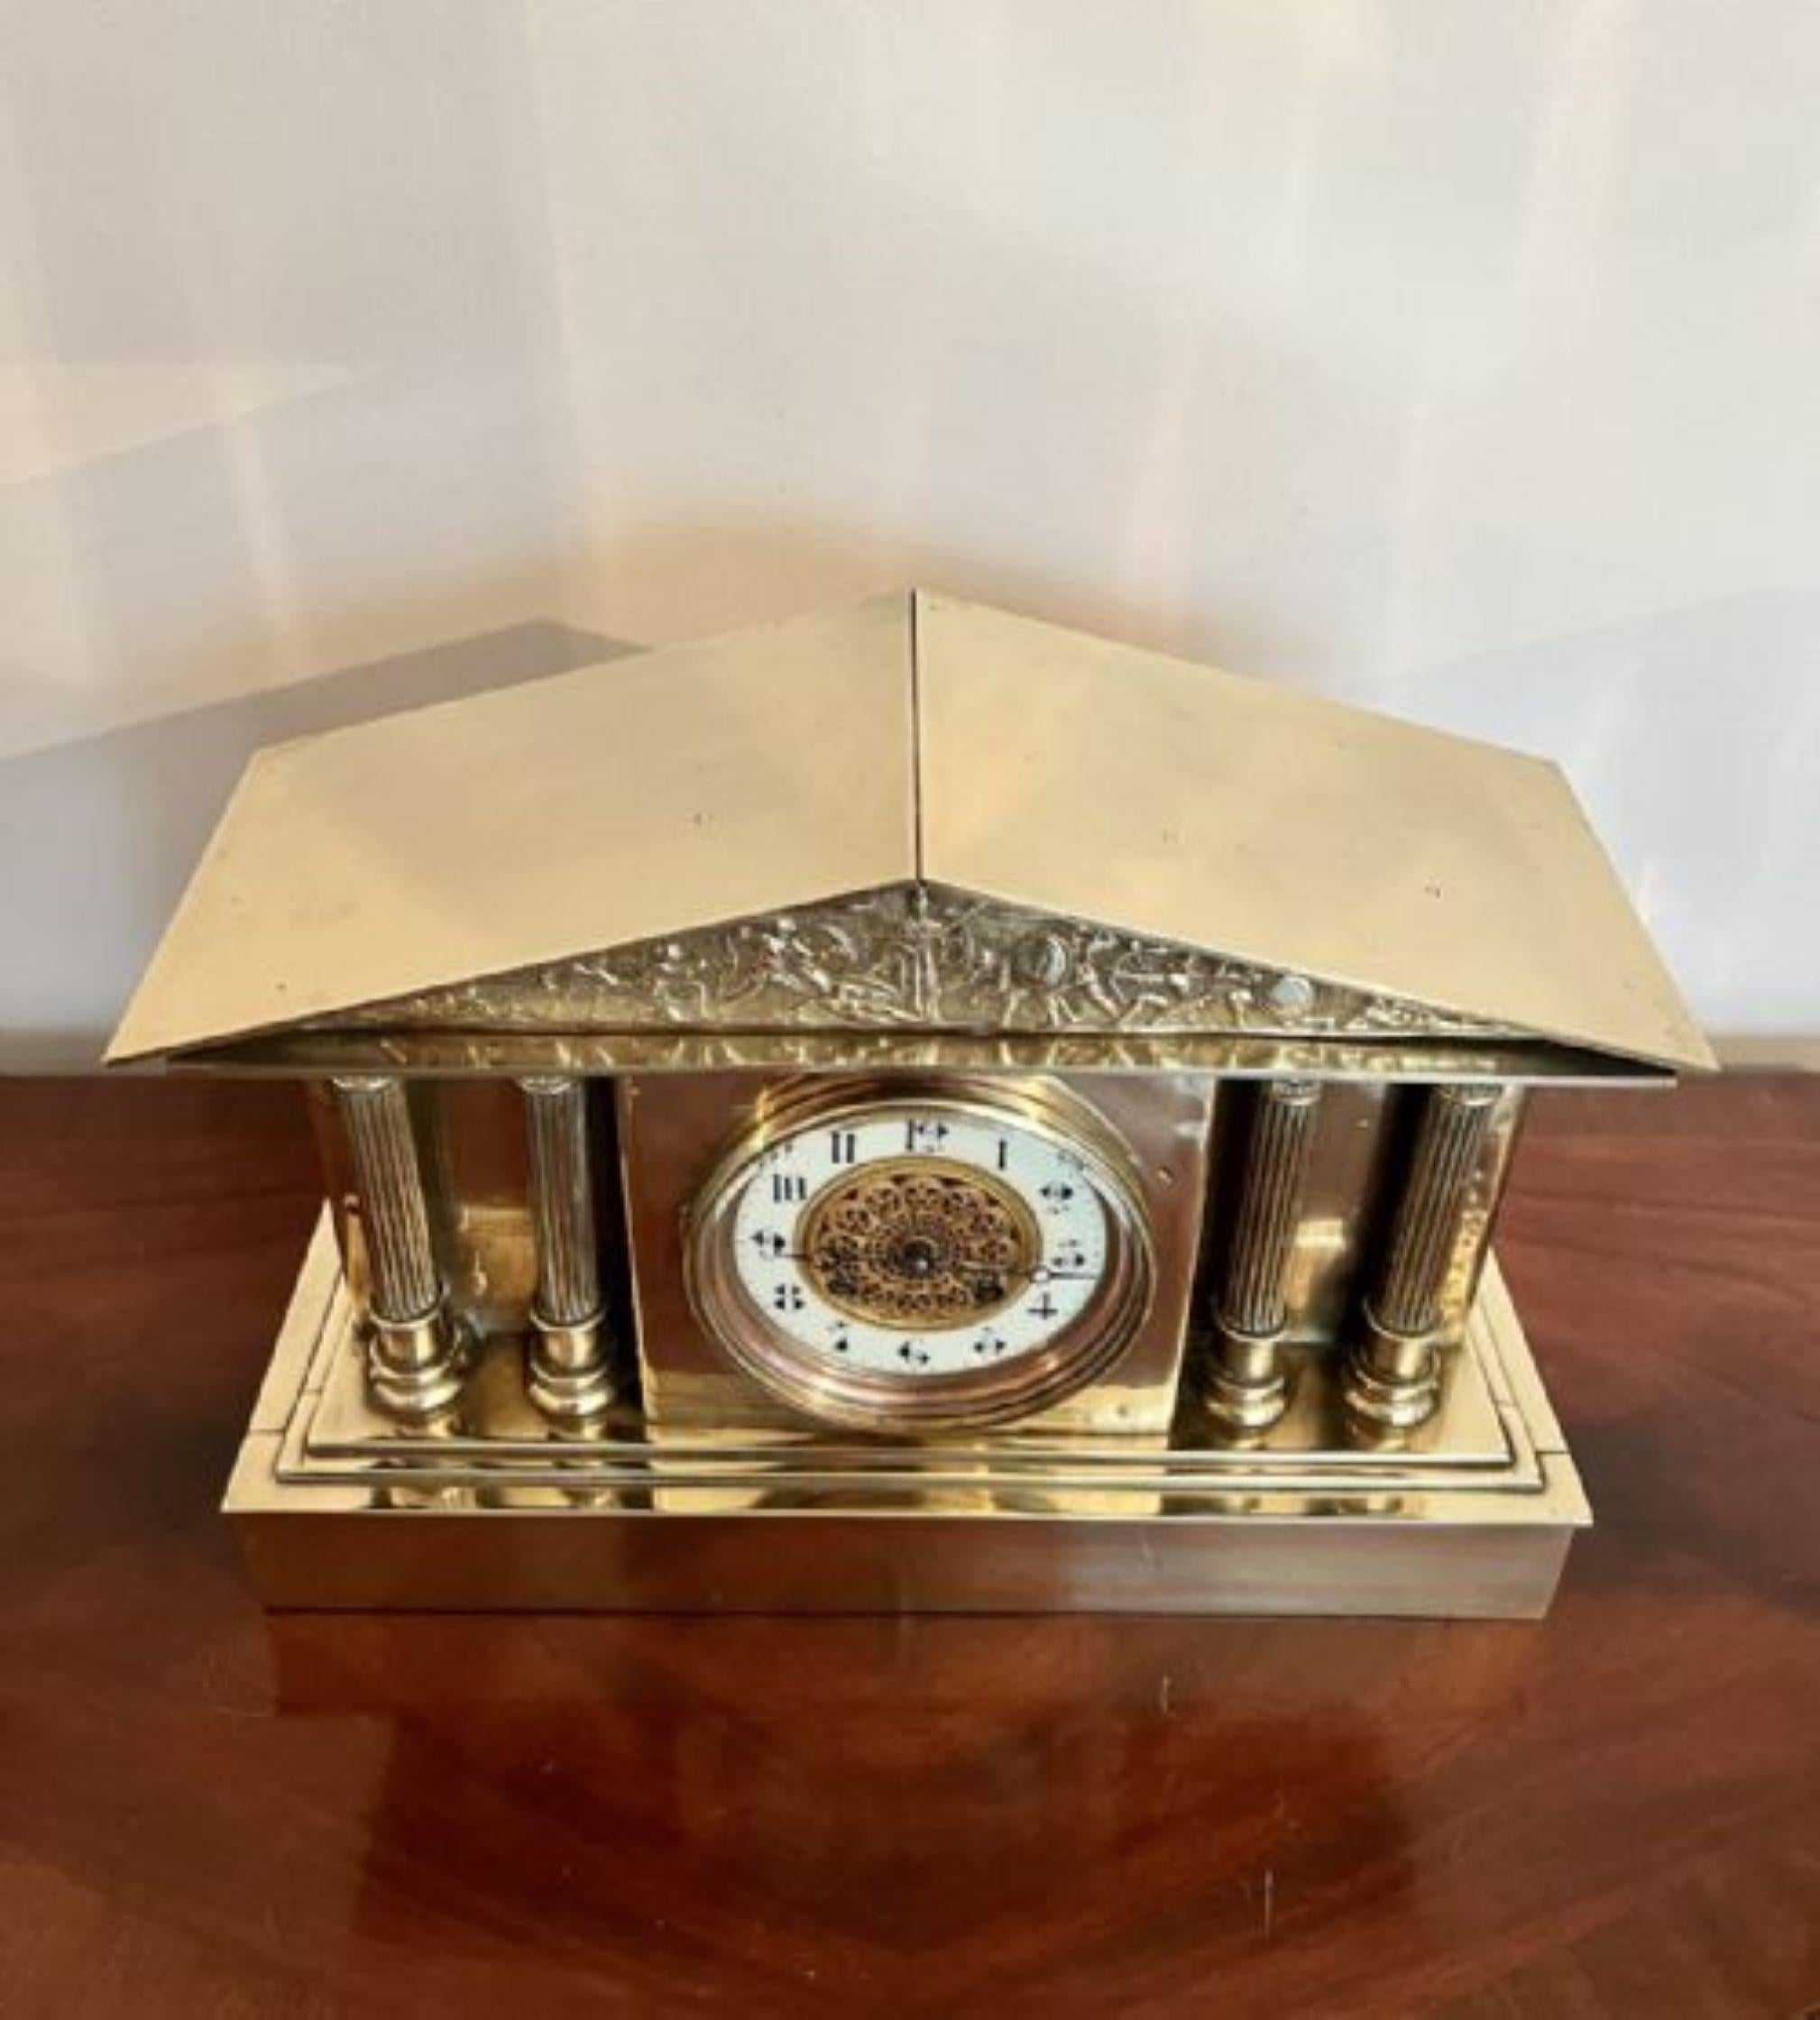 Antique Victorian quality brass mantle clock having a quality antique Victorian brass case with ornate decoration, circular dial with original hands, Roman numerals, 8 day French movement striking on the hour and half hour on a gong with the